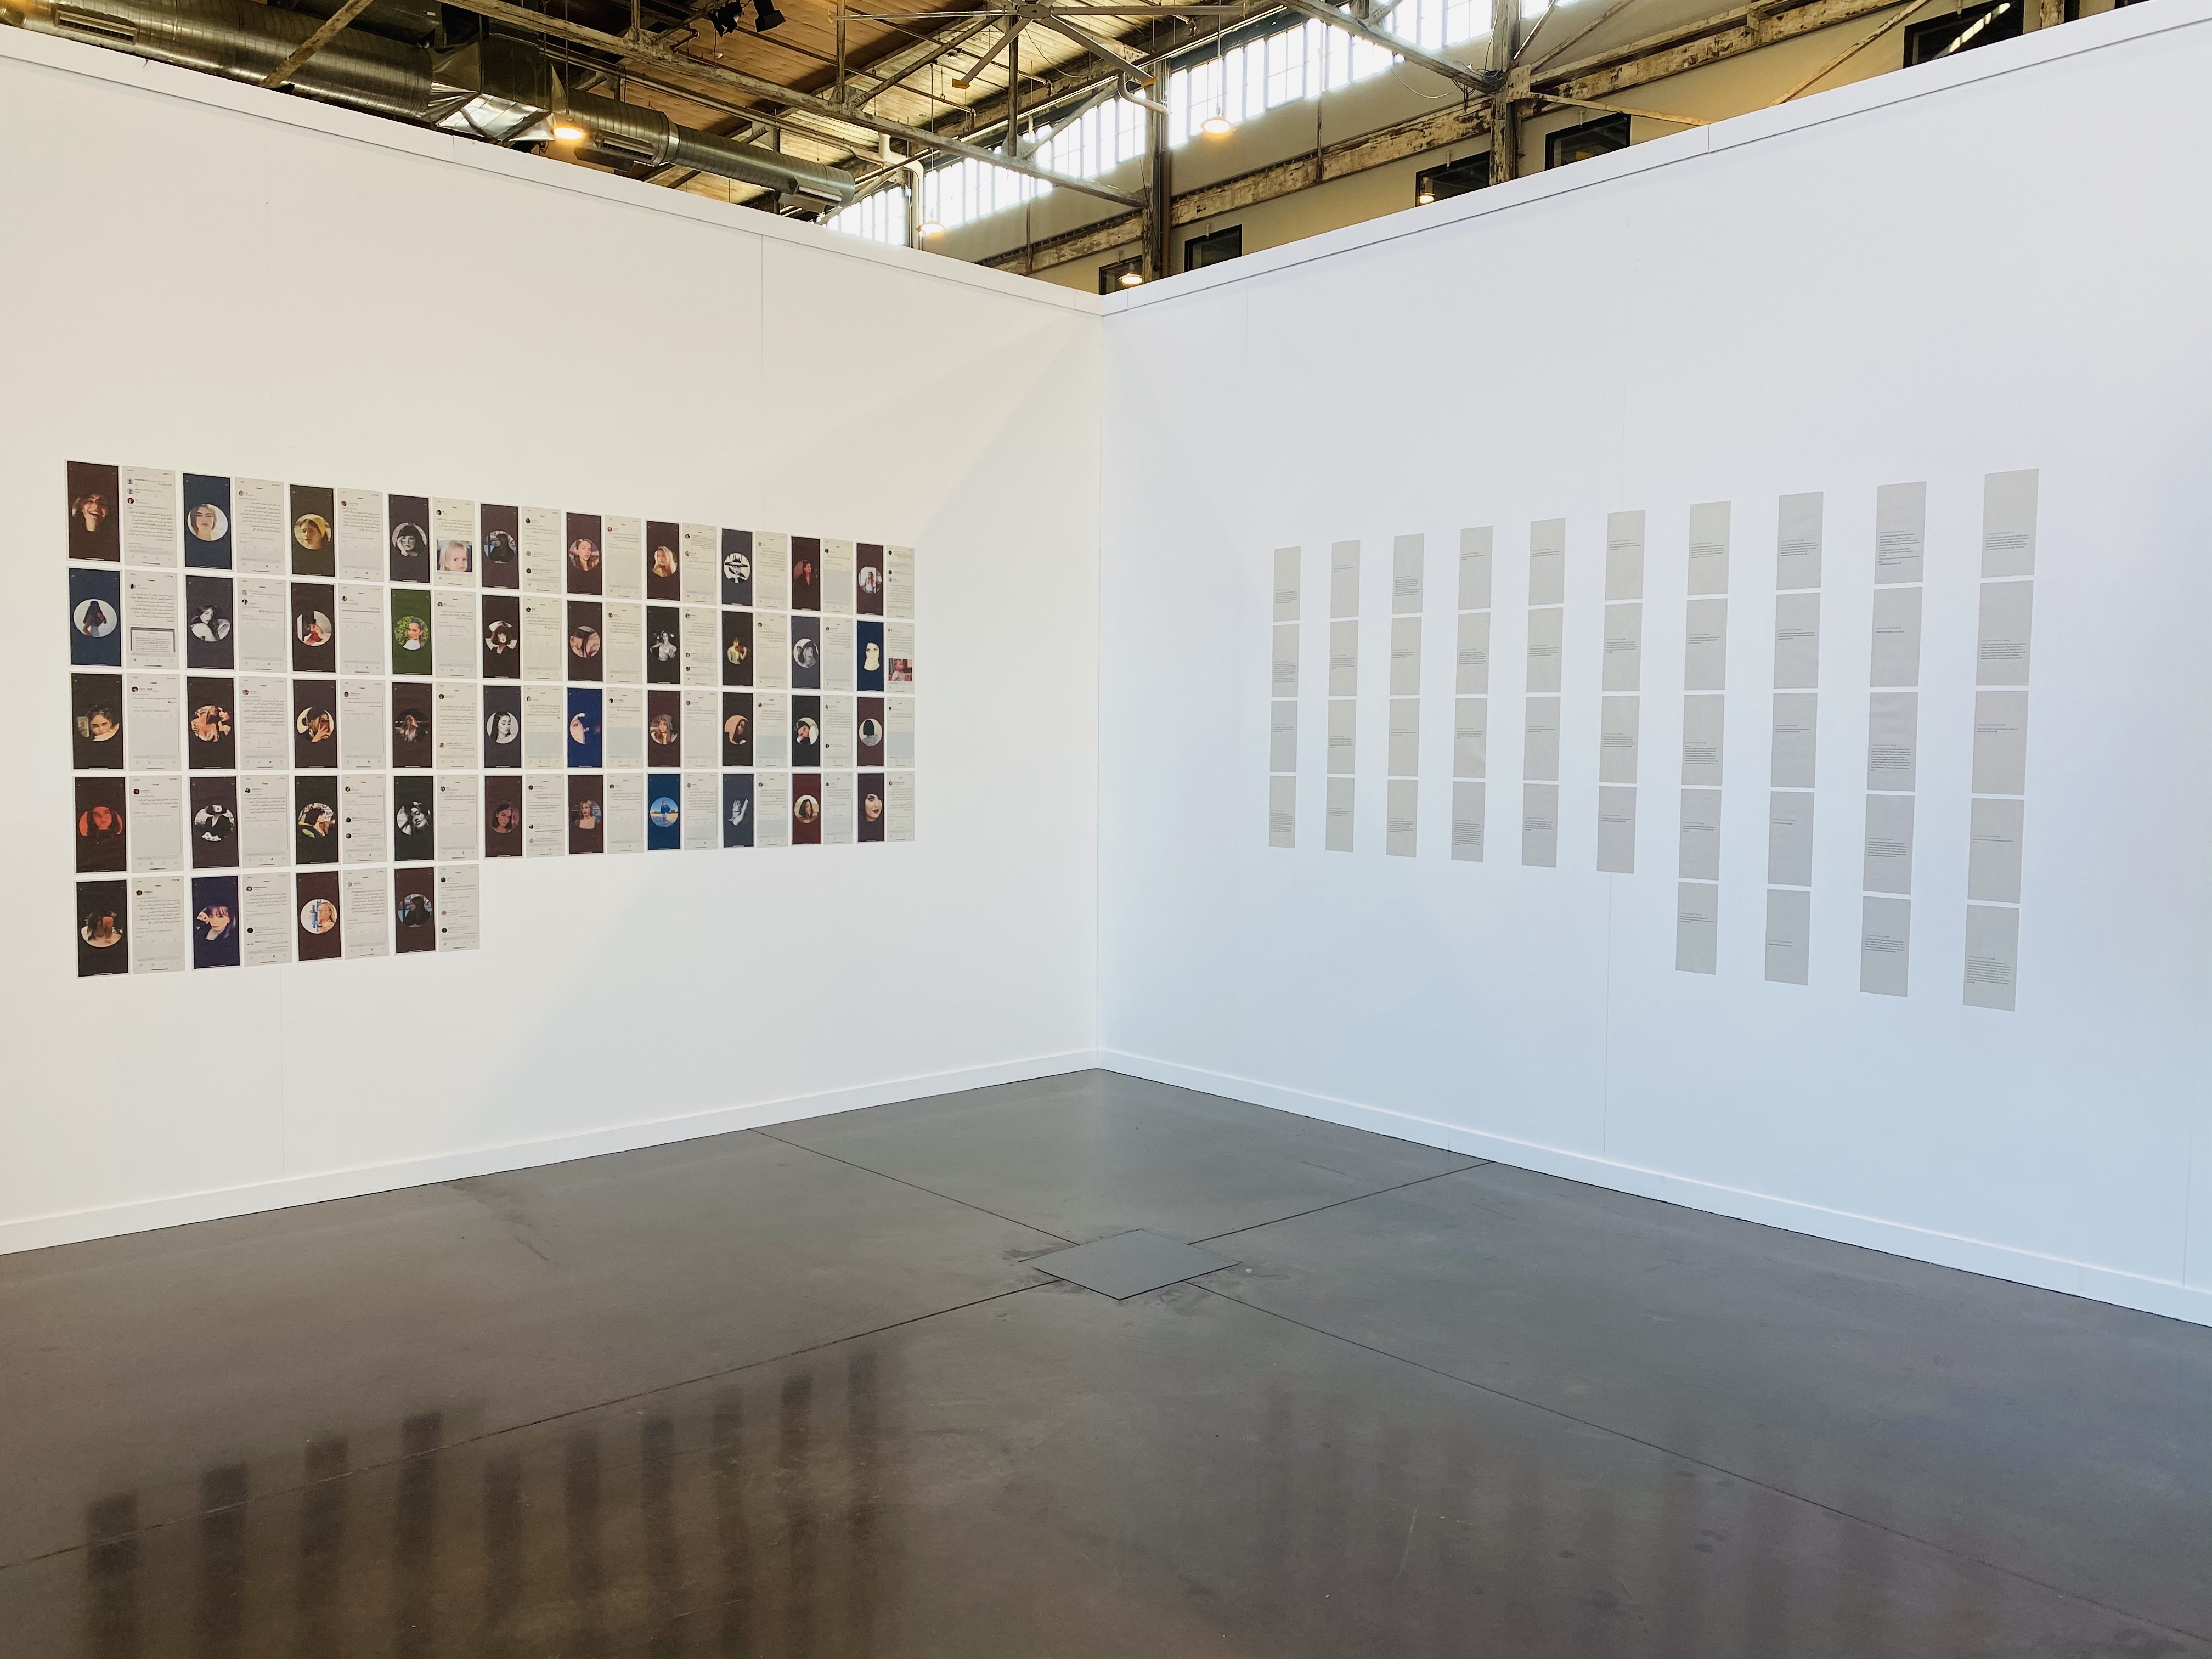 This work is an ongoing archive the artist started to collect in 2019 by screenshot twitter comments of women policing other women on how they suppose to dress. On the facing wall, There are screenshots of the same women's profile pictures of anonymous women dressing in a contradictory way of what they believe.